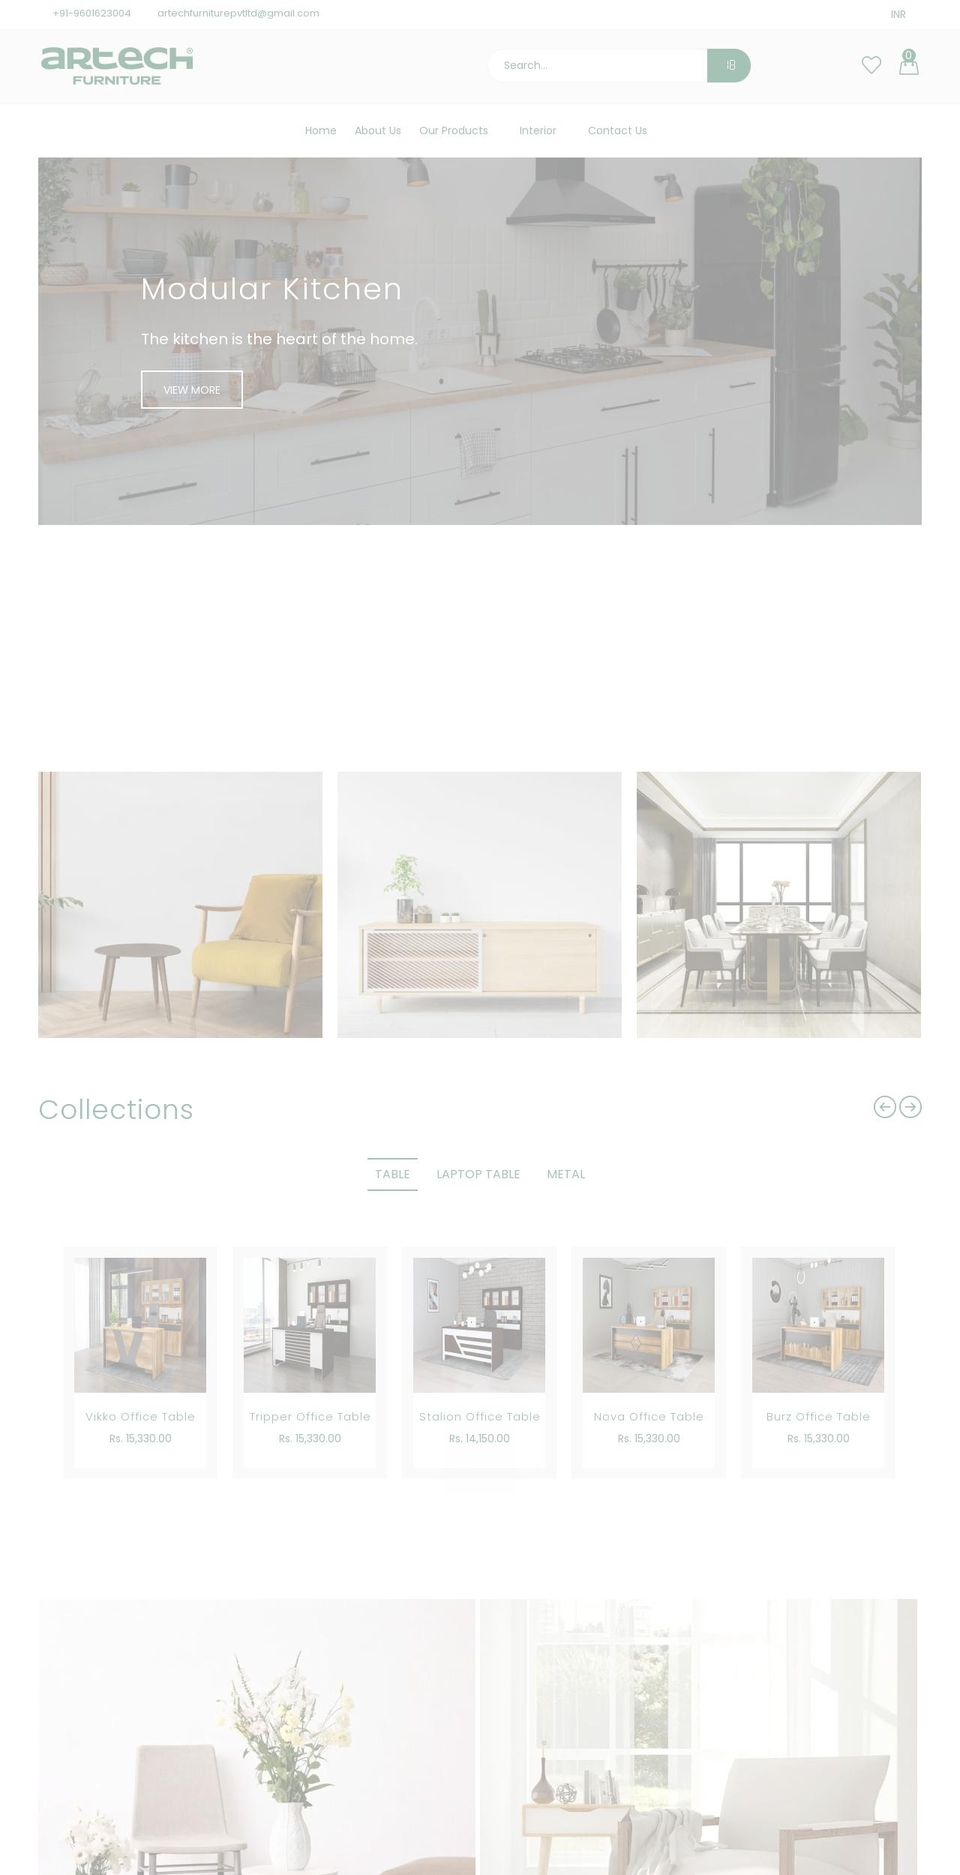 install Shopify theme site example artechfurniture.com